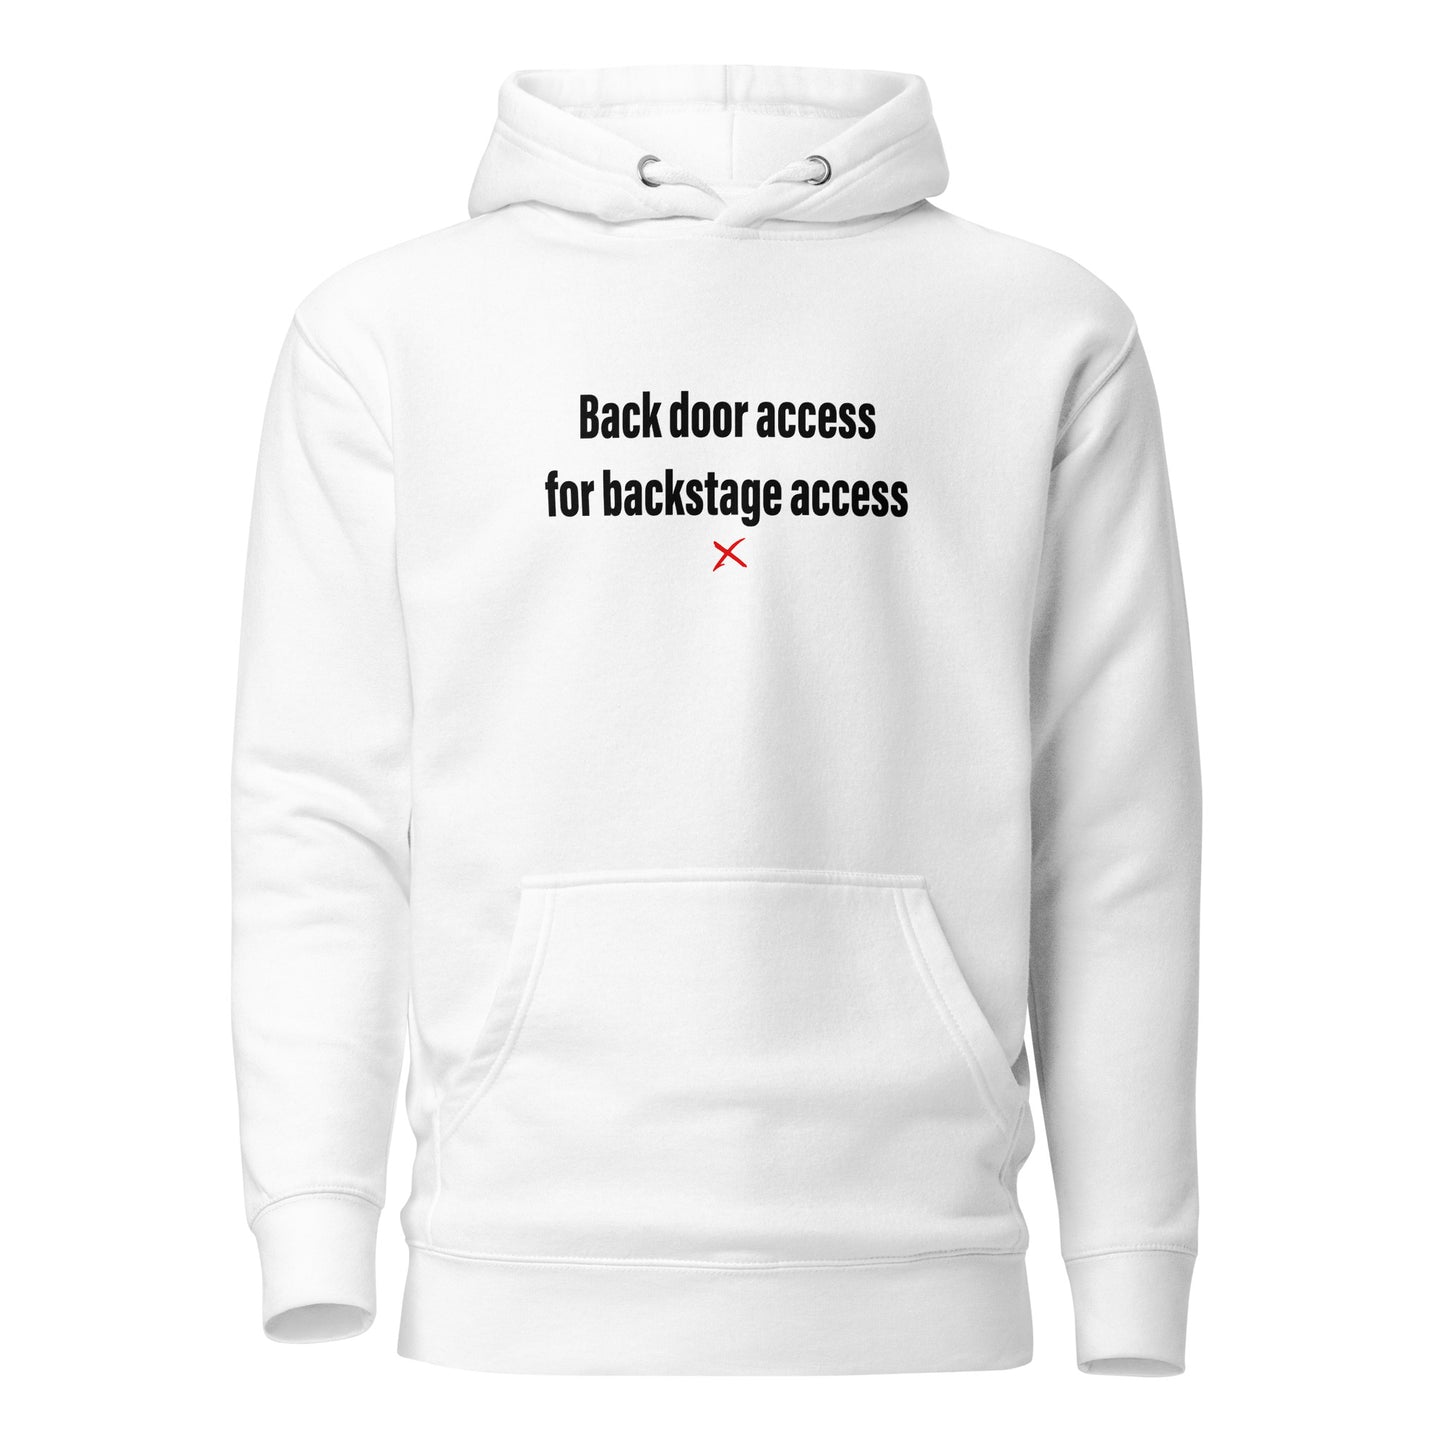 Back door access for backstage access - Hoodie